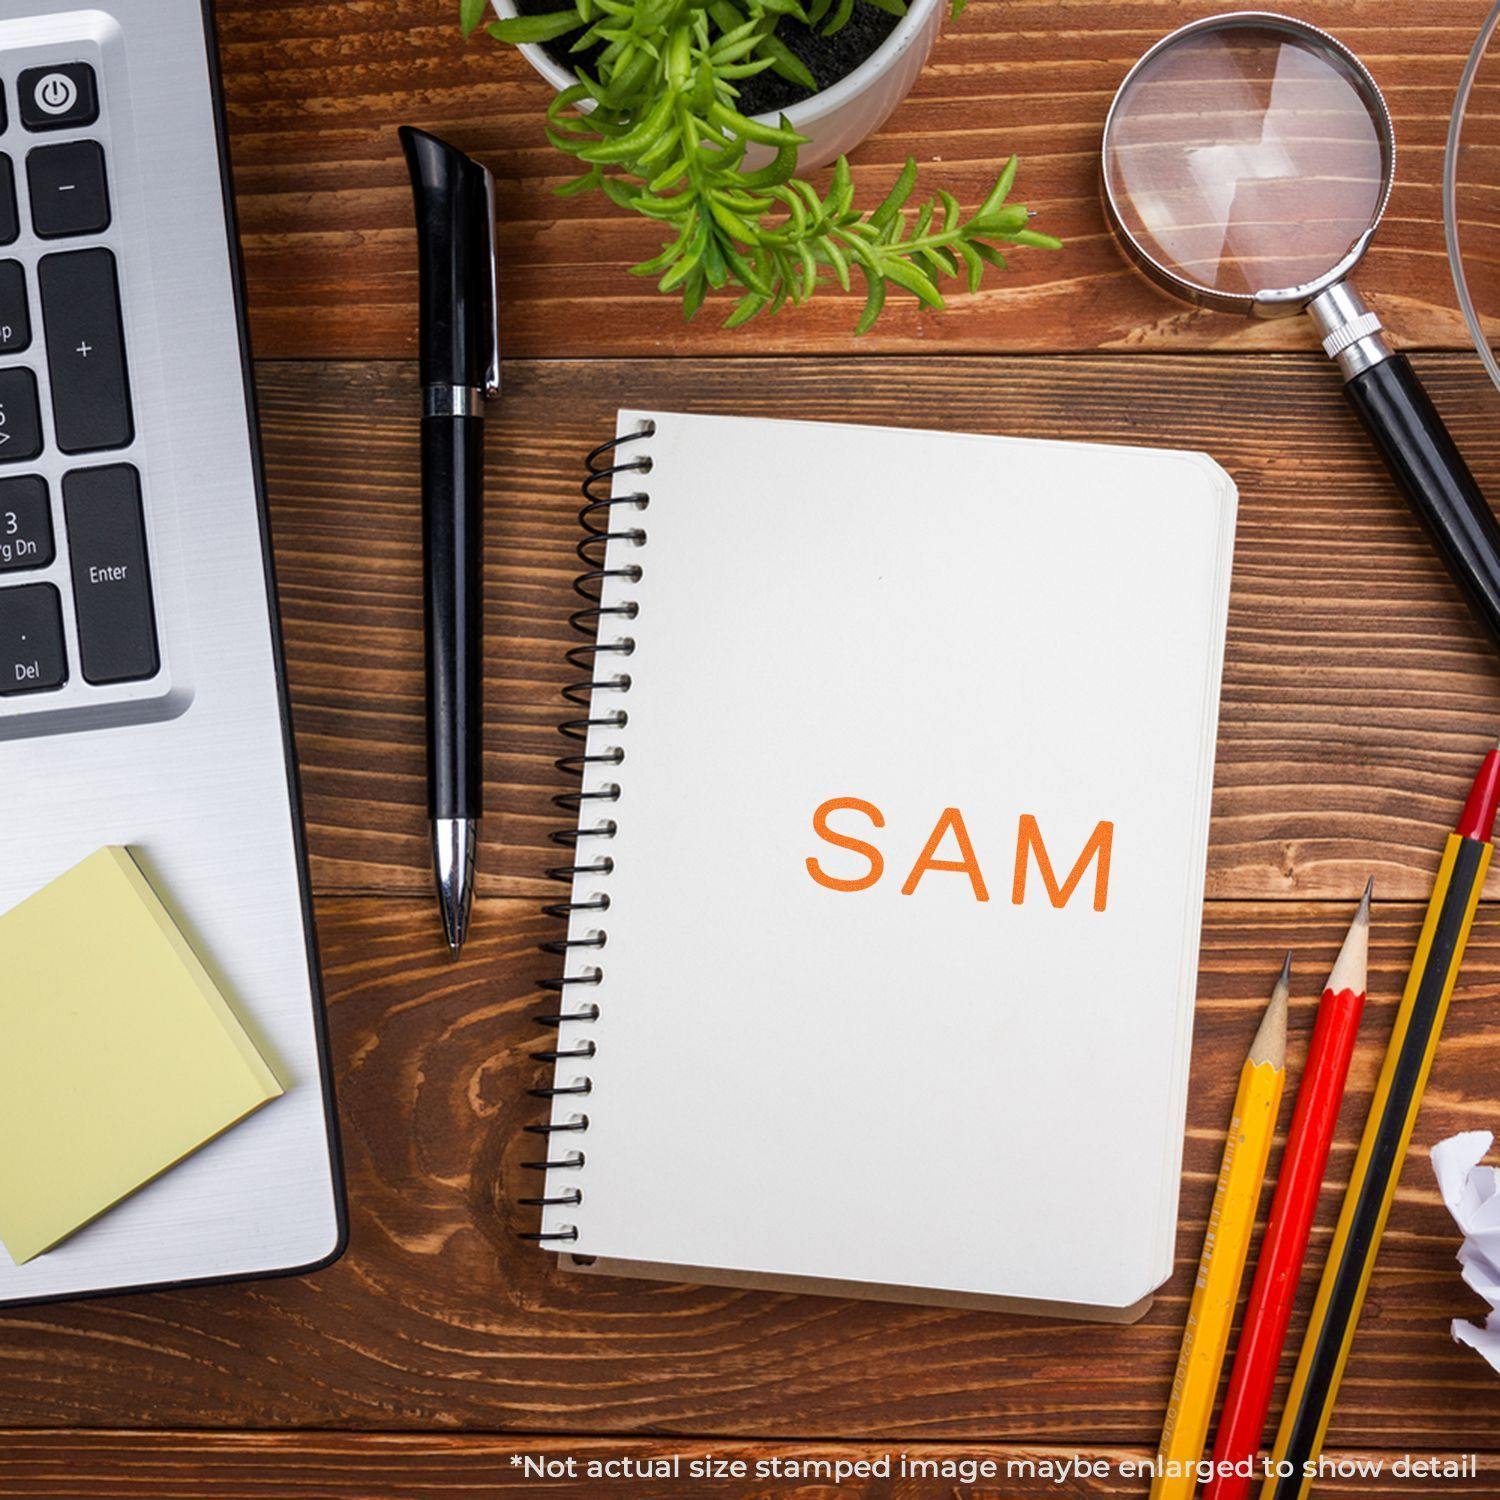 A stock office rubber stamp with a stamped image showing how the text "SAM" in a large font is displayed after stamping.